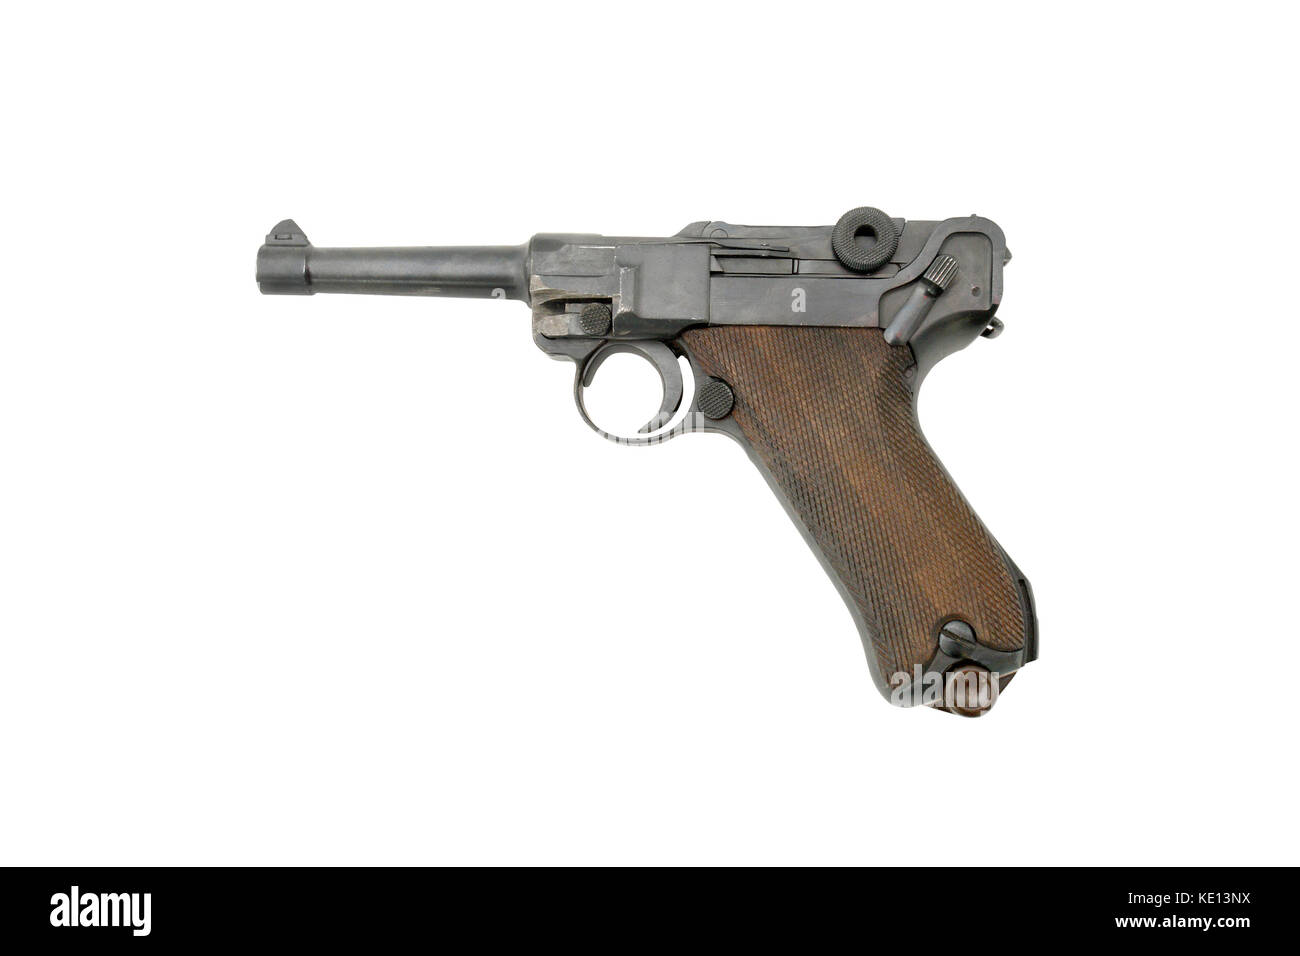 German pistole (Pistol Parabellum). Official P.08. Name from the Latin: si vis pacem, para bellum, meaning if you want peace, prepare for war. Very po Stock Photo